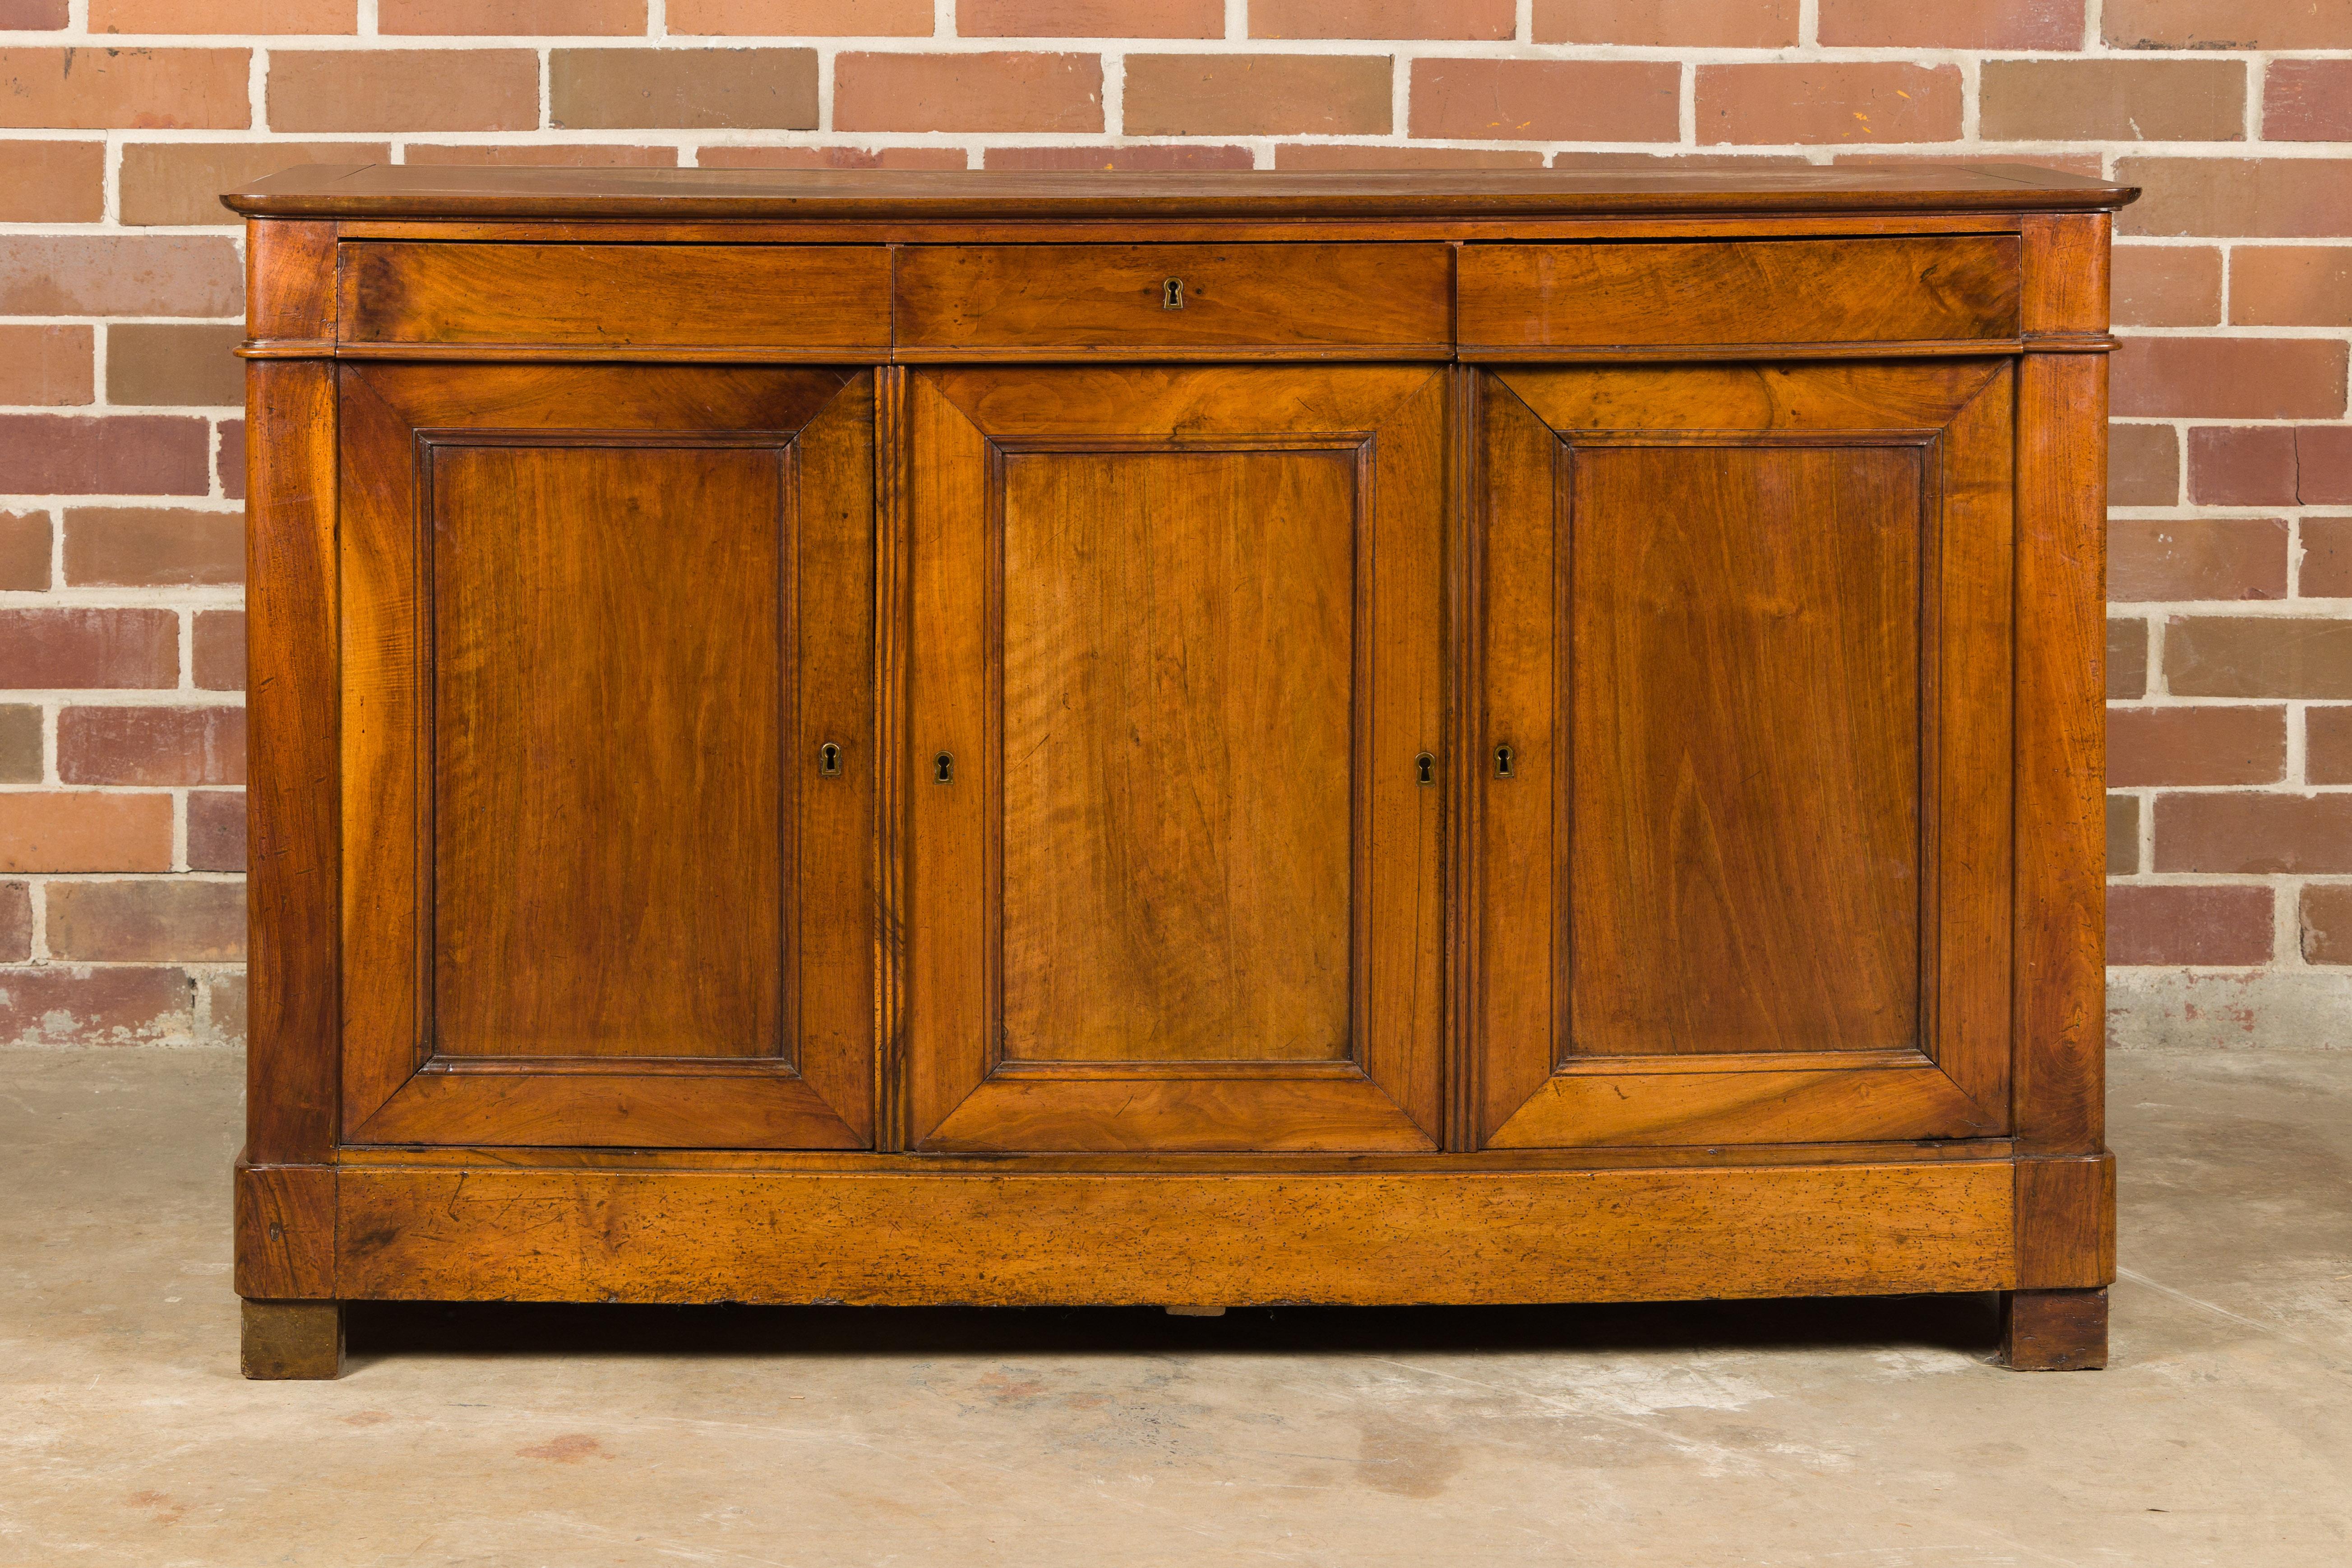 A French walnut enfilade from the 19th century with three drawers over three doors. This 19th-century French walnut enfilade exudes timeless elegance and practicality, embodying the essence of classic French design. With three drawers gracefully